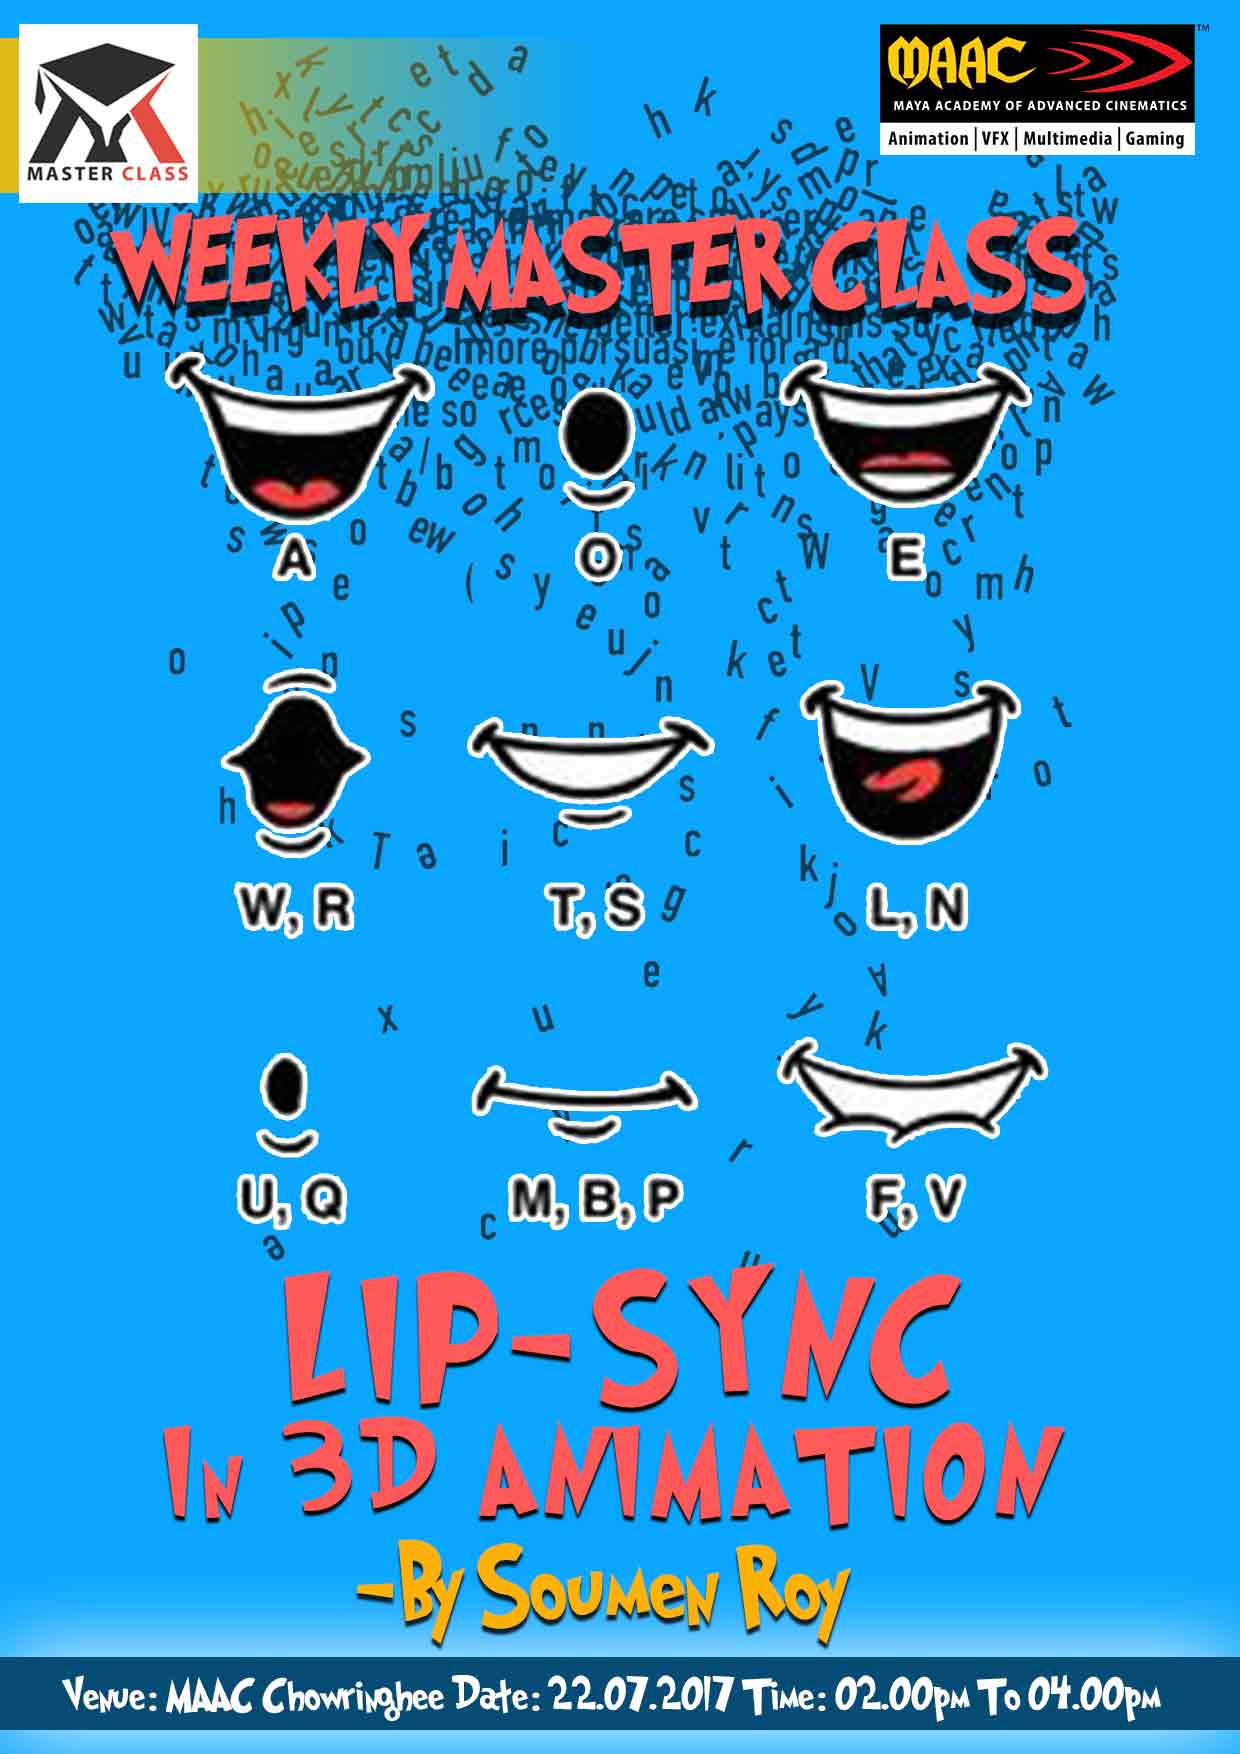 Weekly Master Class on Lip-Sync in 3D Animation - Soumen Roy